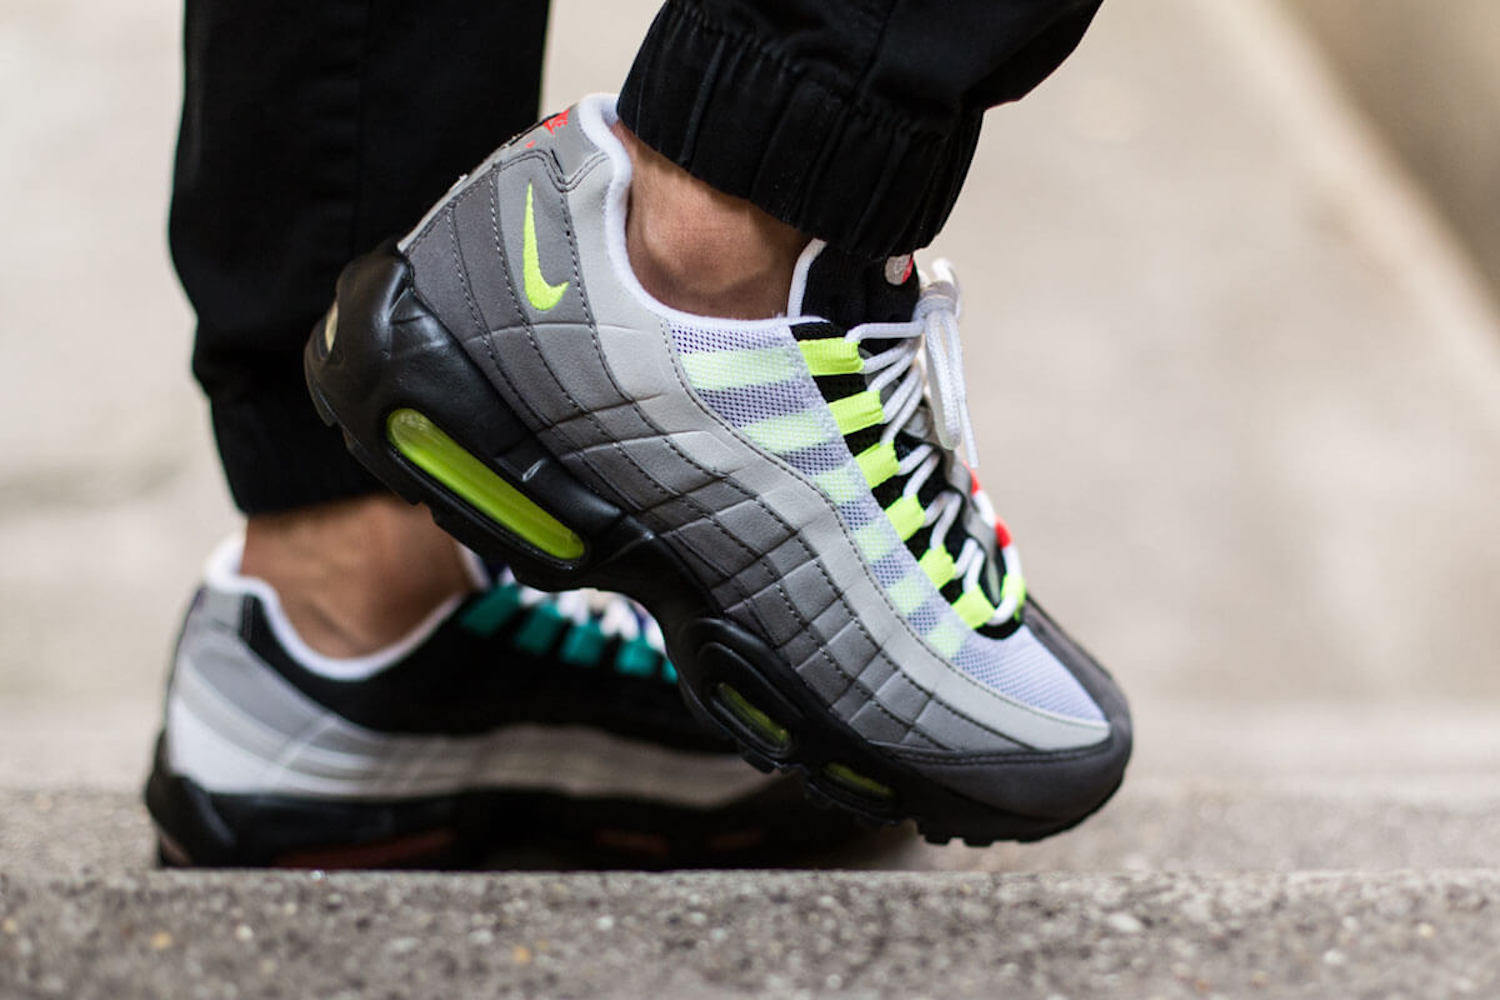 Why Do People Call Nike Air Max 95s '110s'?